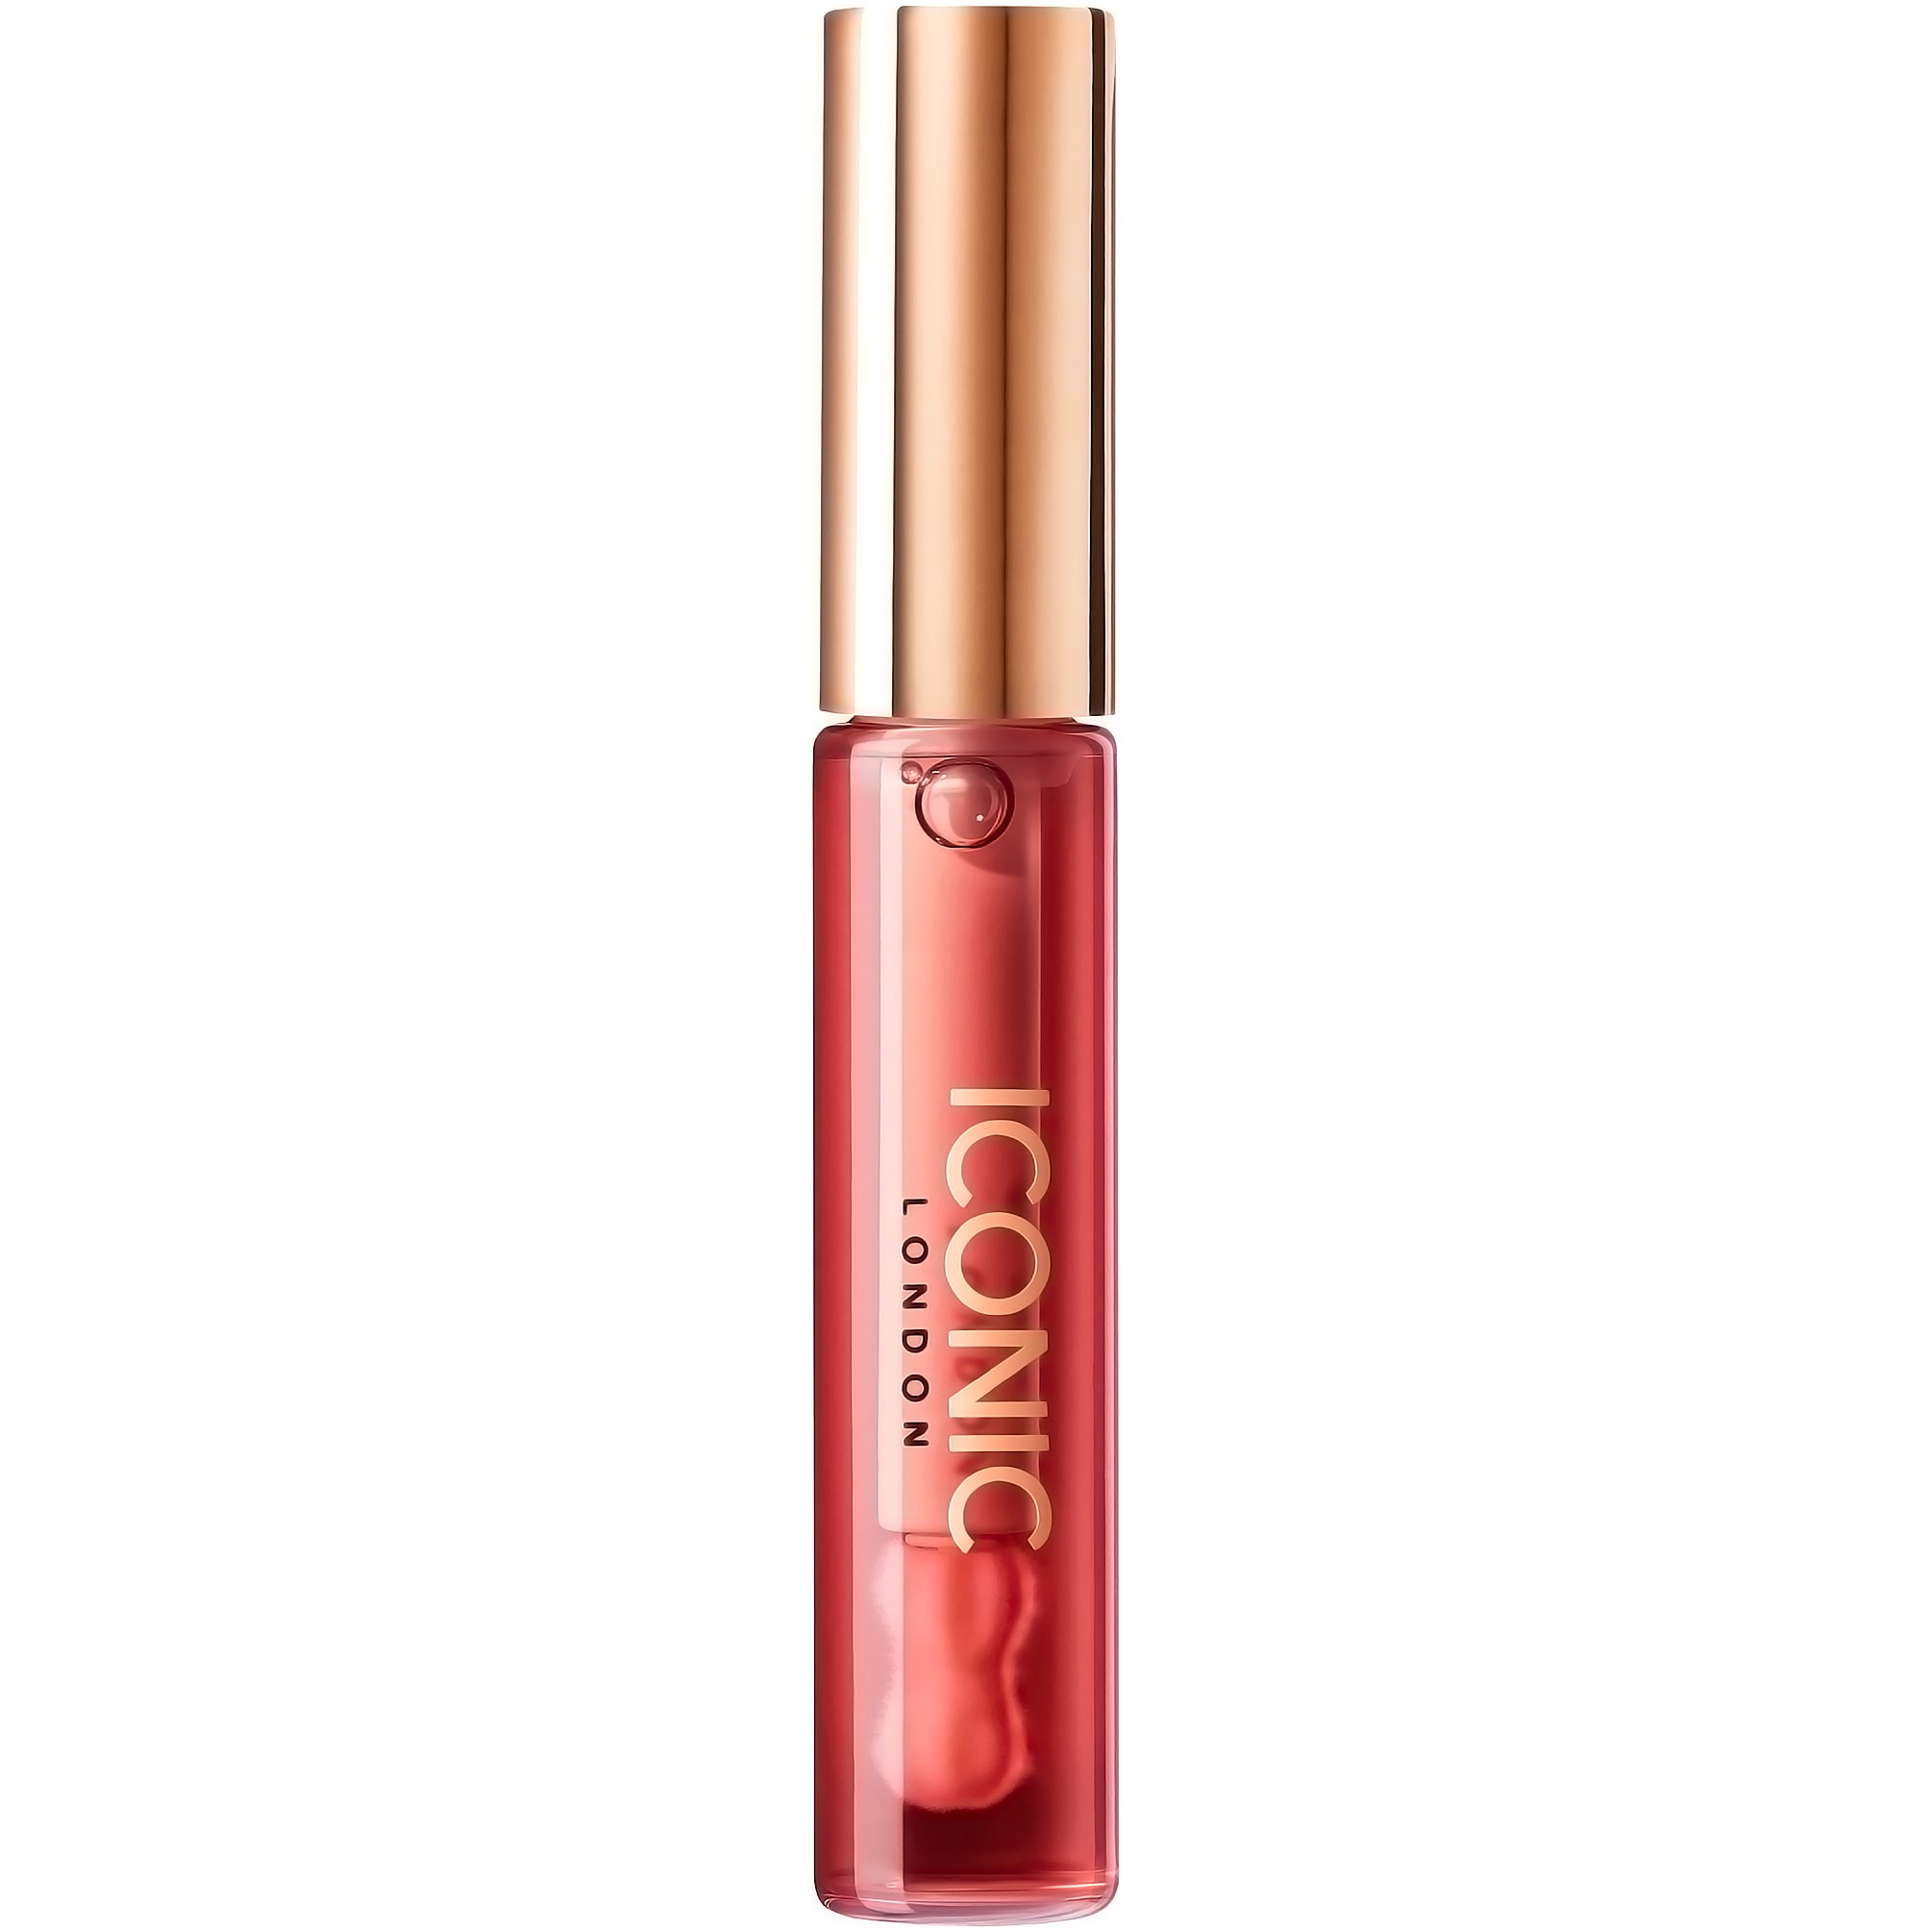 ICONIC London Lustre Lip Oil One to Watch